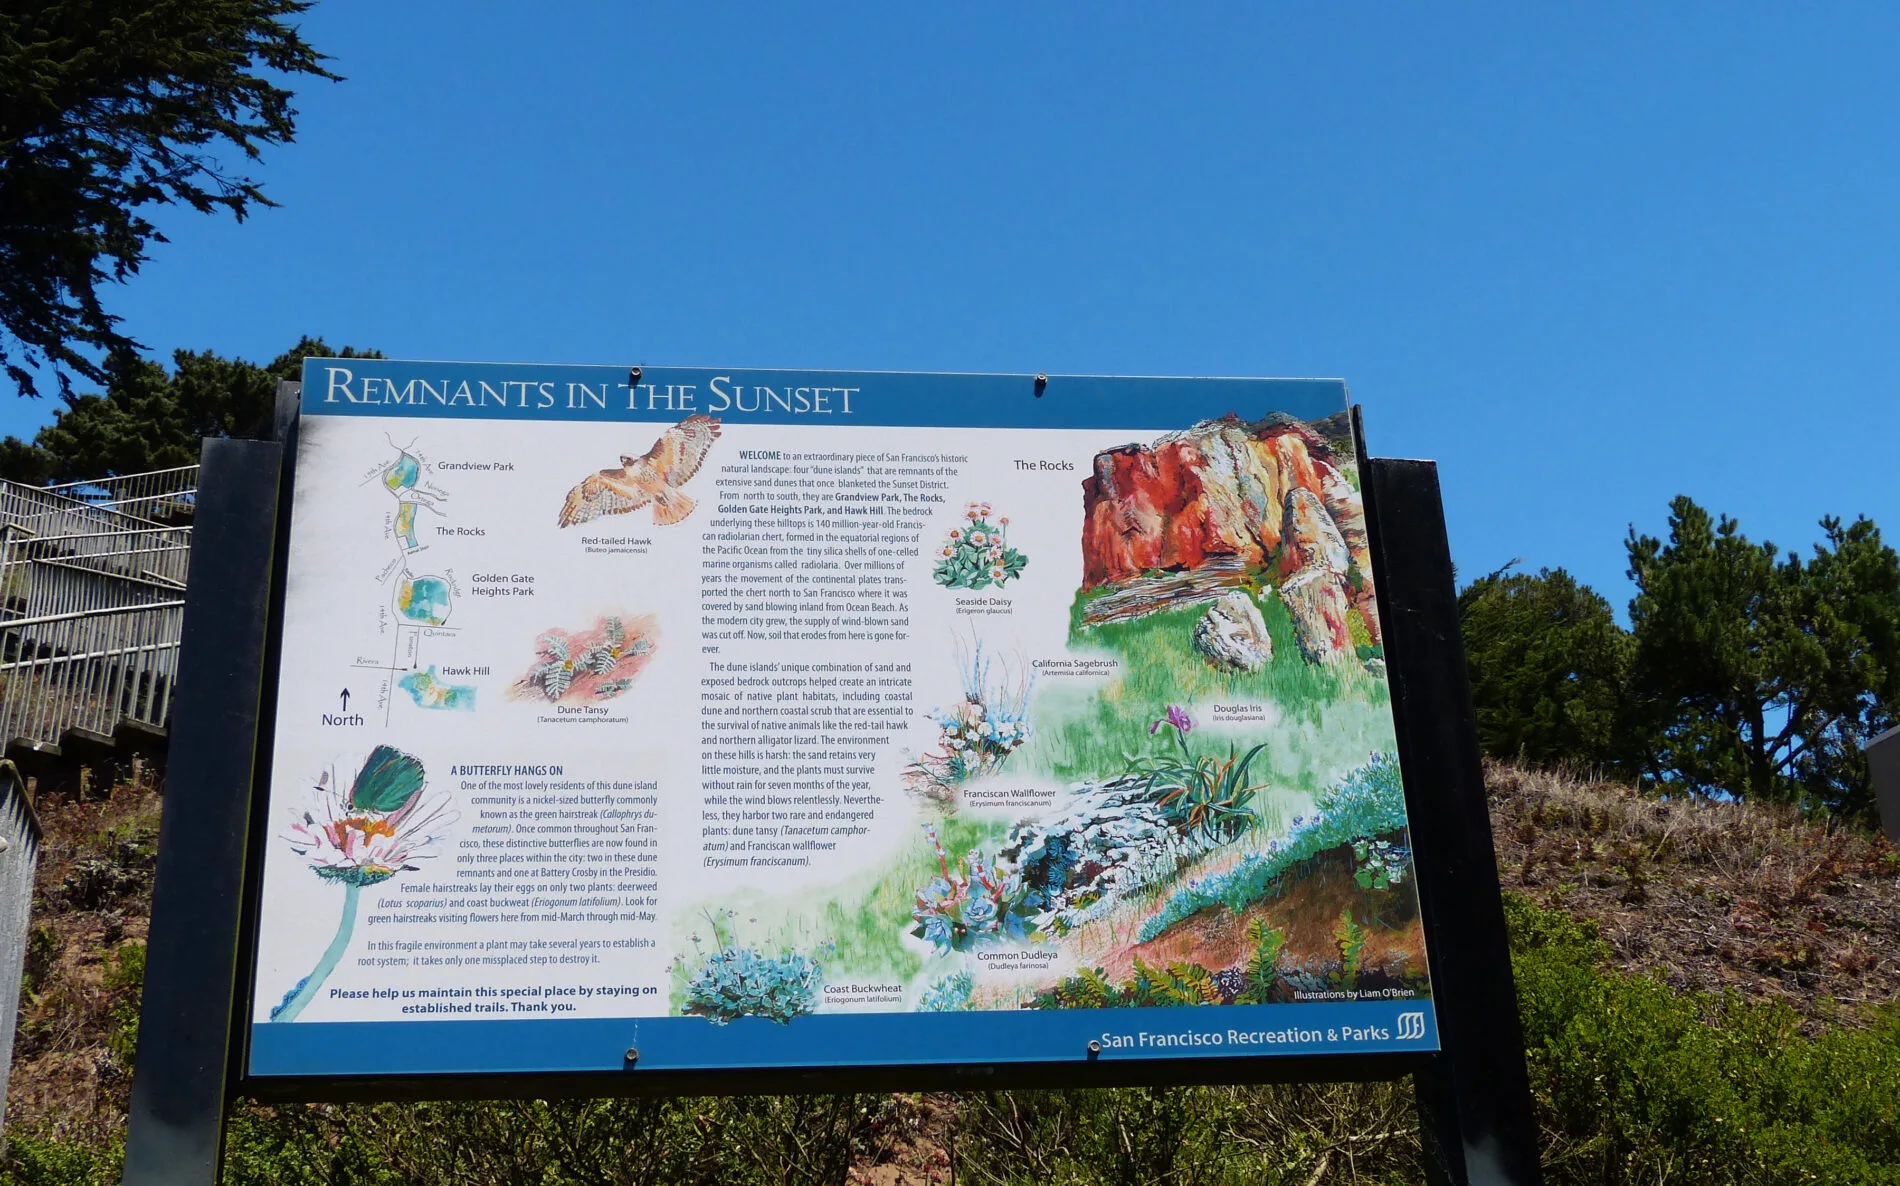 San Francisco Park’s sign provides information about the local flora and fauna in Grandview Park.